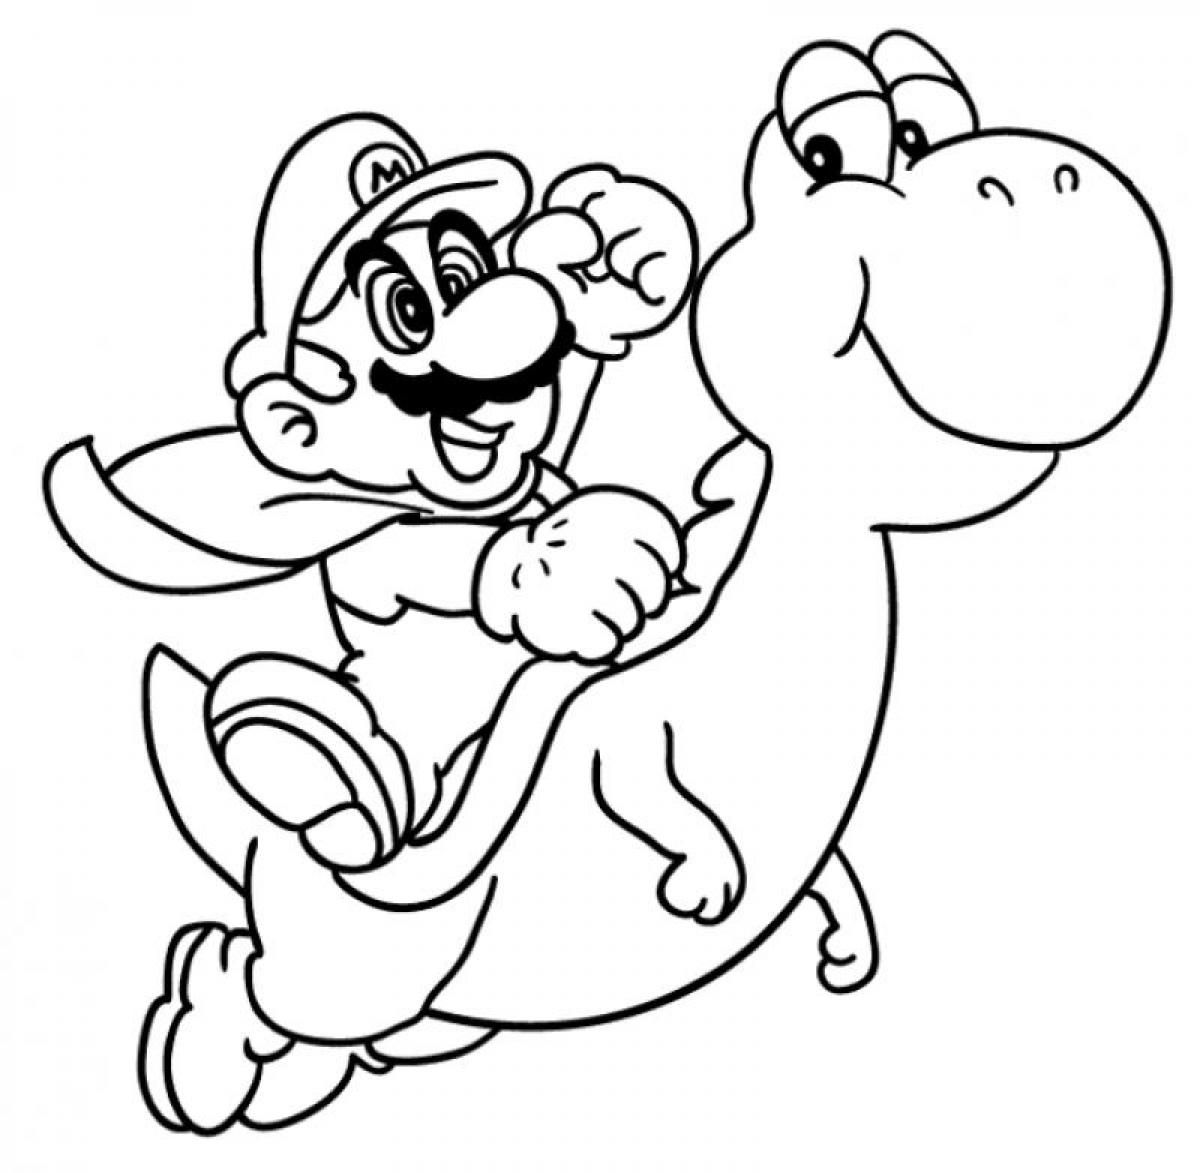 Mario And Yoshi - Coloring Pages for Kids and for Adults